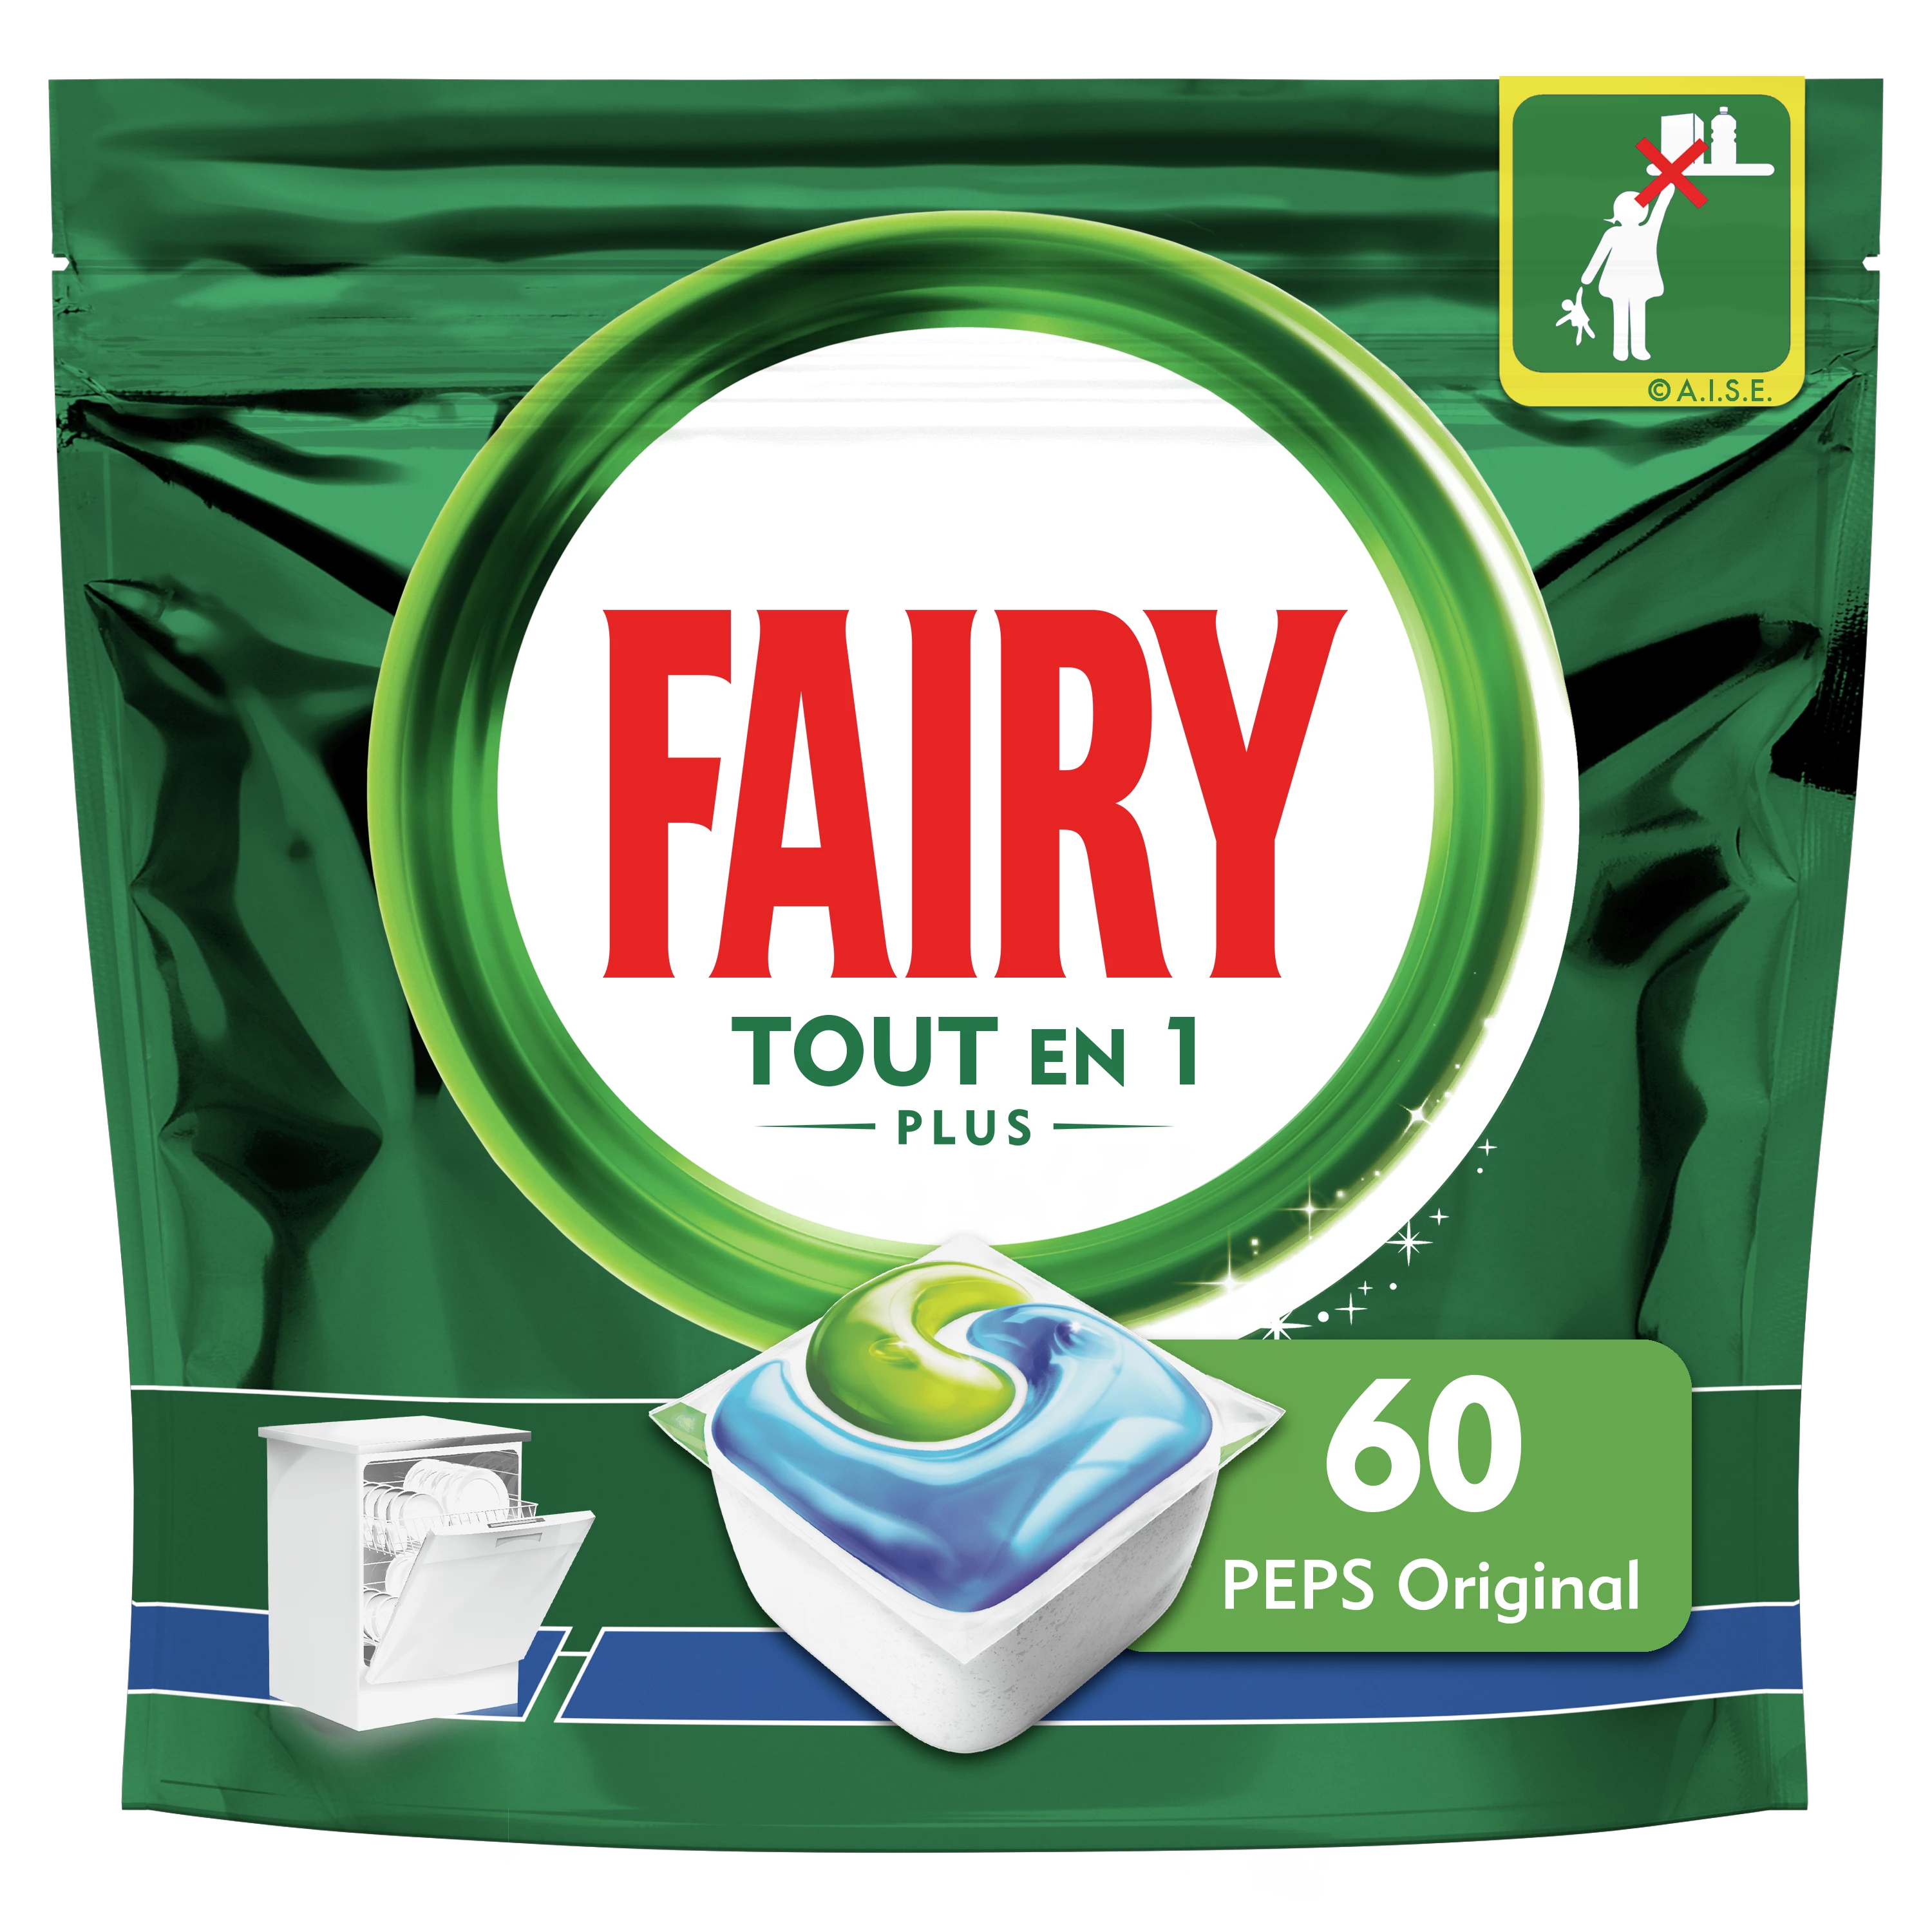 All-in-1 dishwasher tablet Original X60 - FAIRY